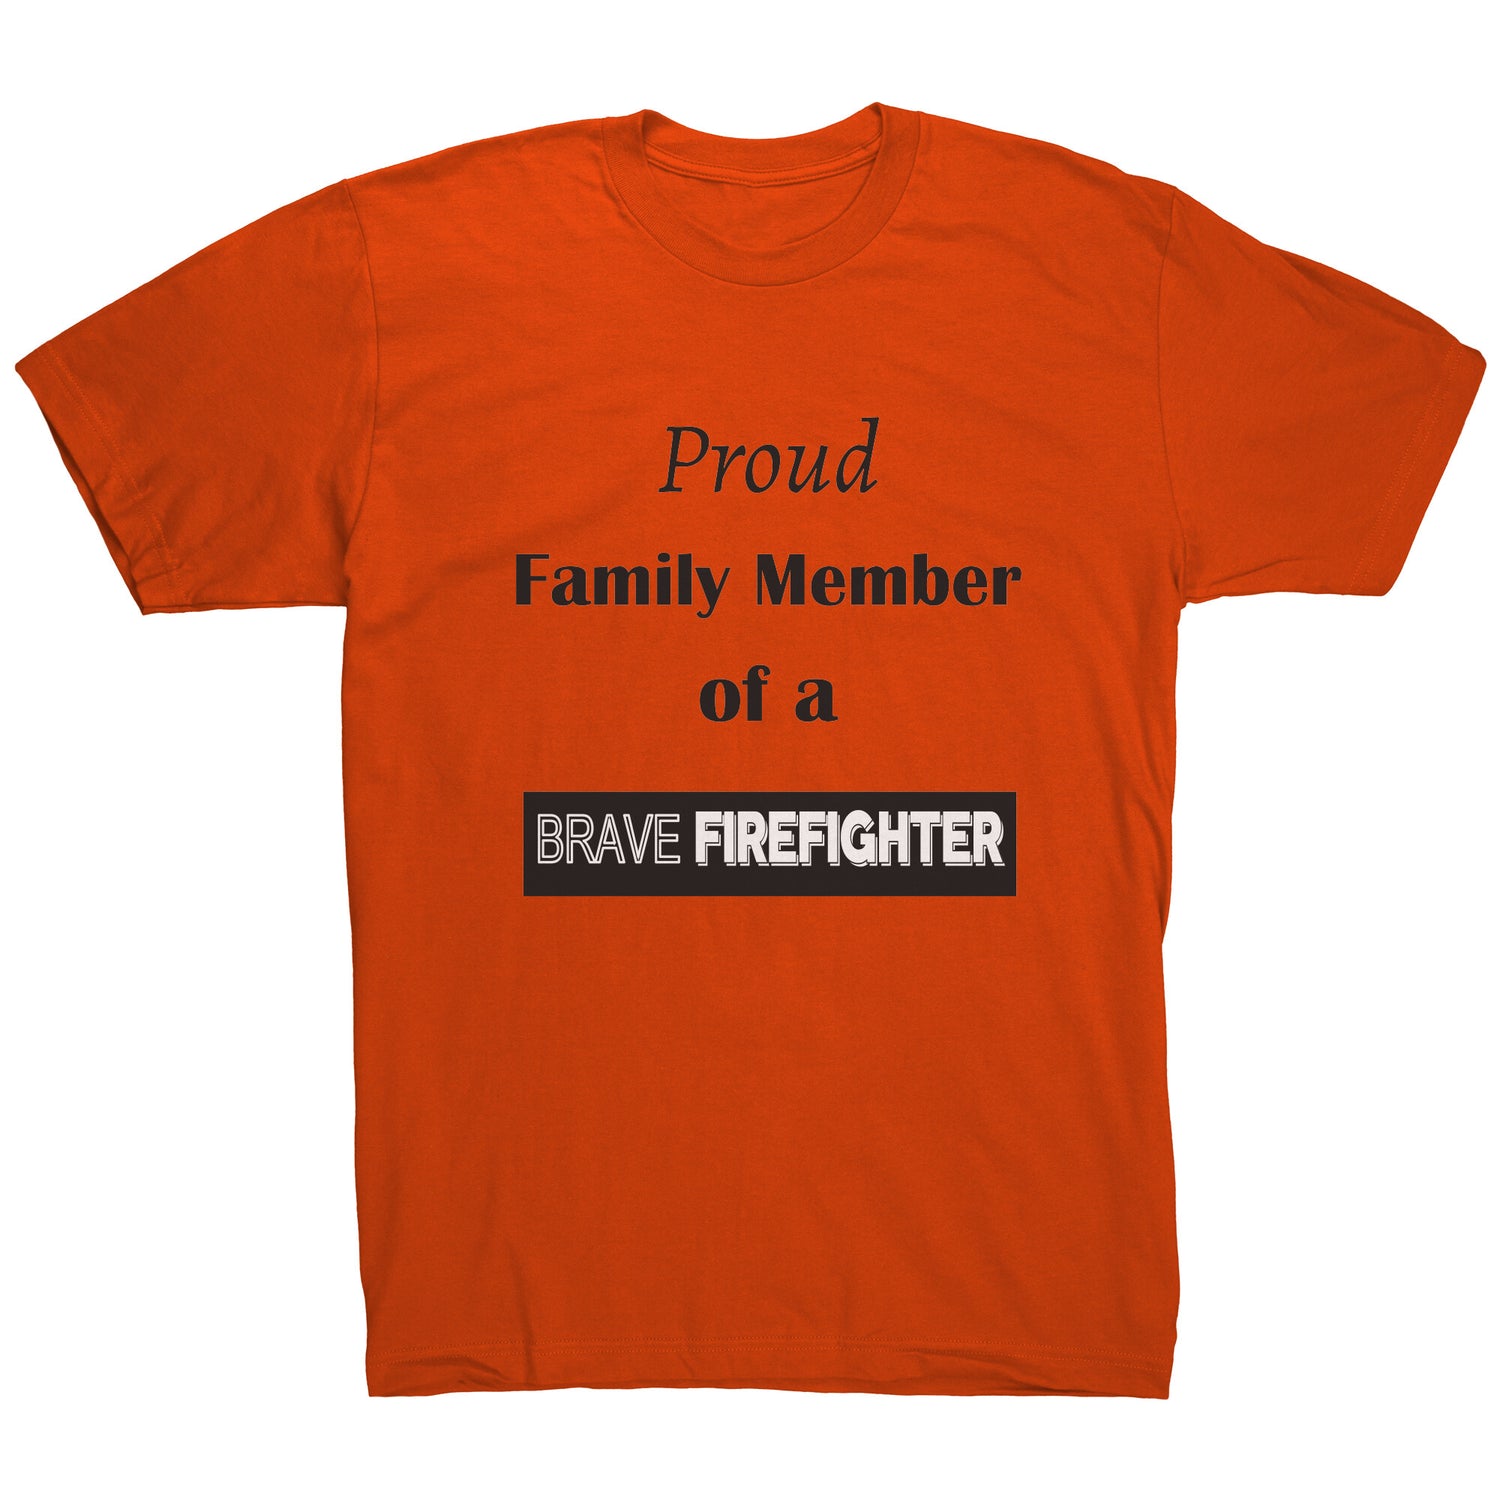 Proud Family Member of a Brave Firefighter Lettering Mens Shirt - Signs and Seasons Gifts